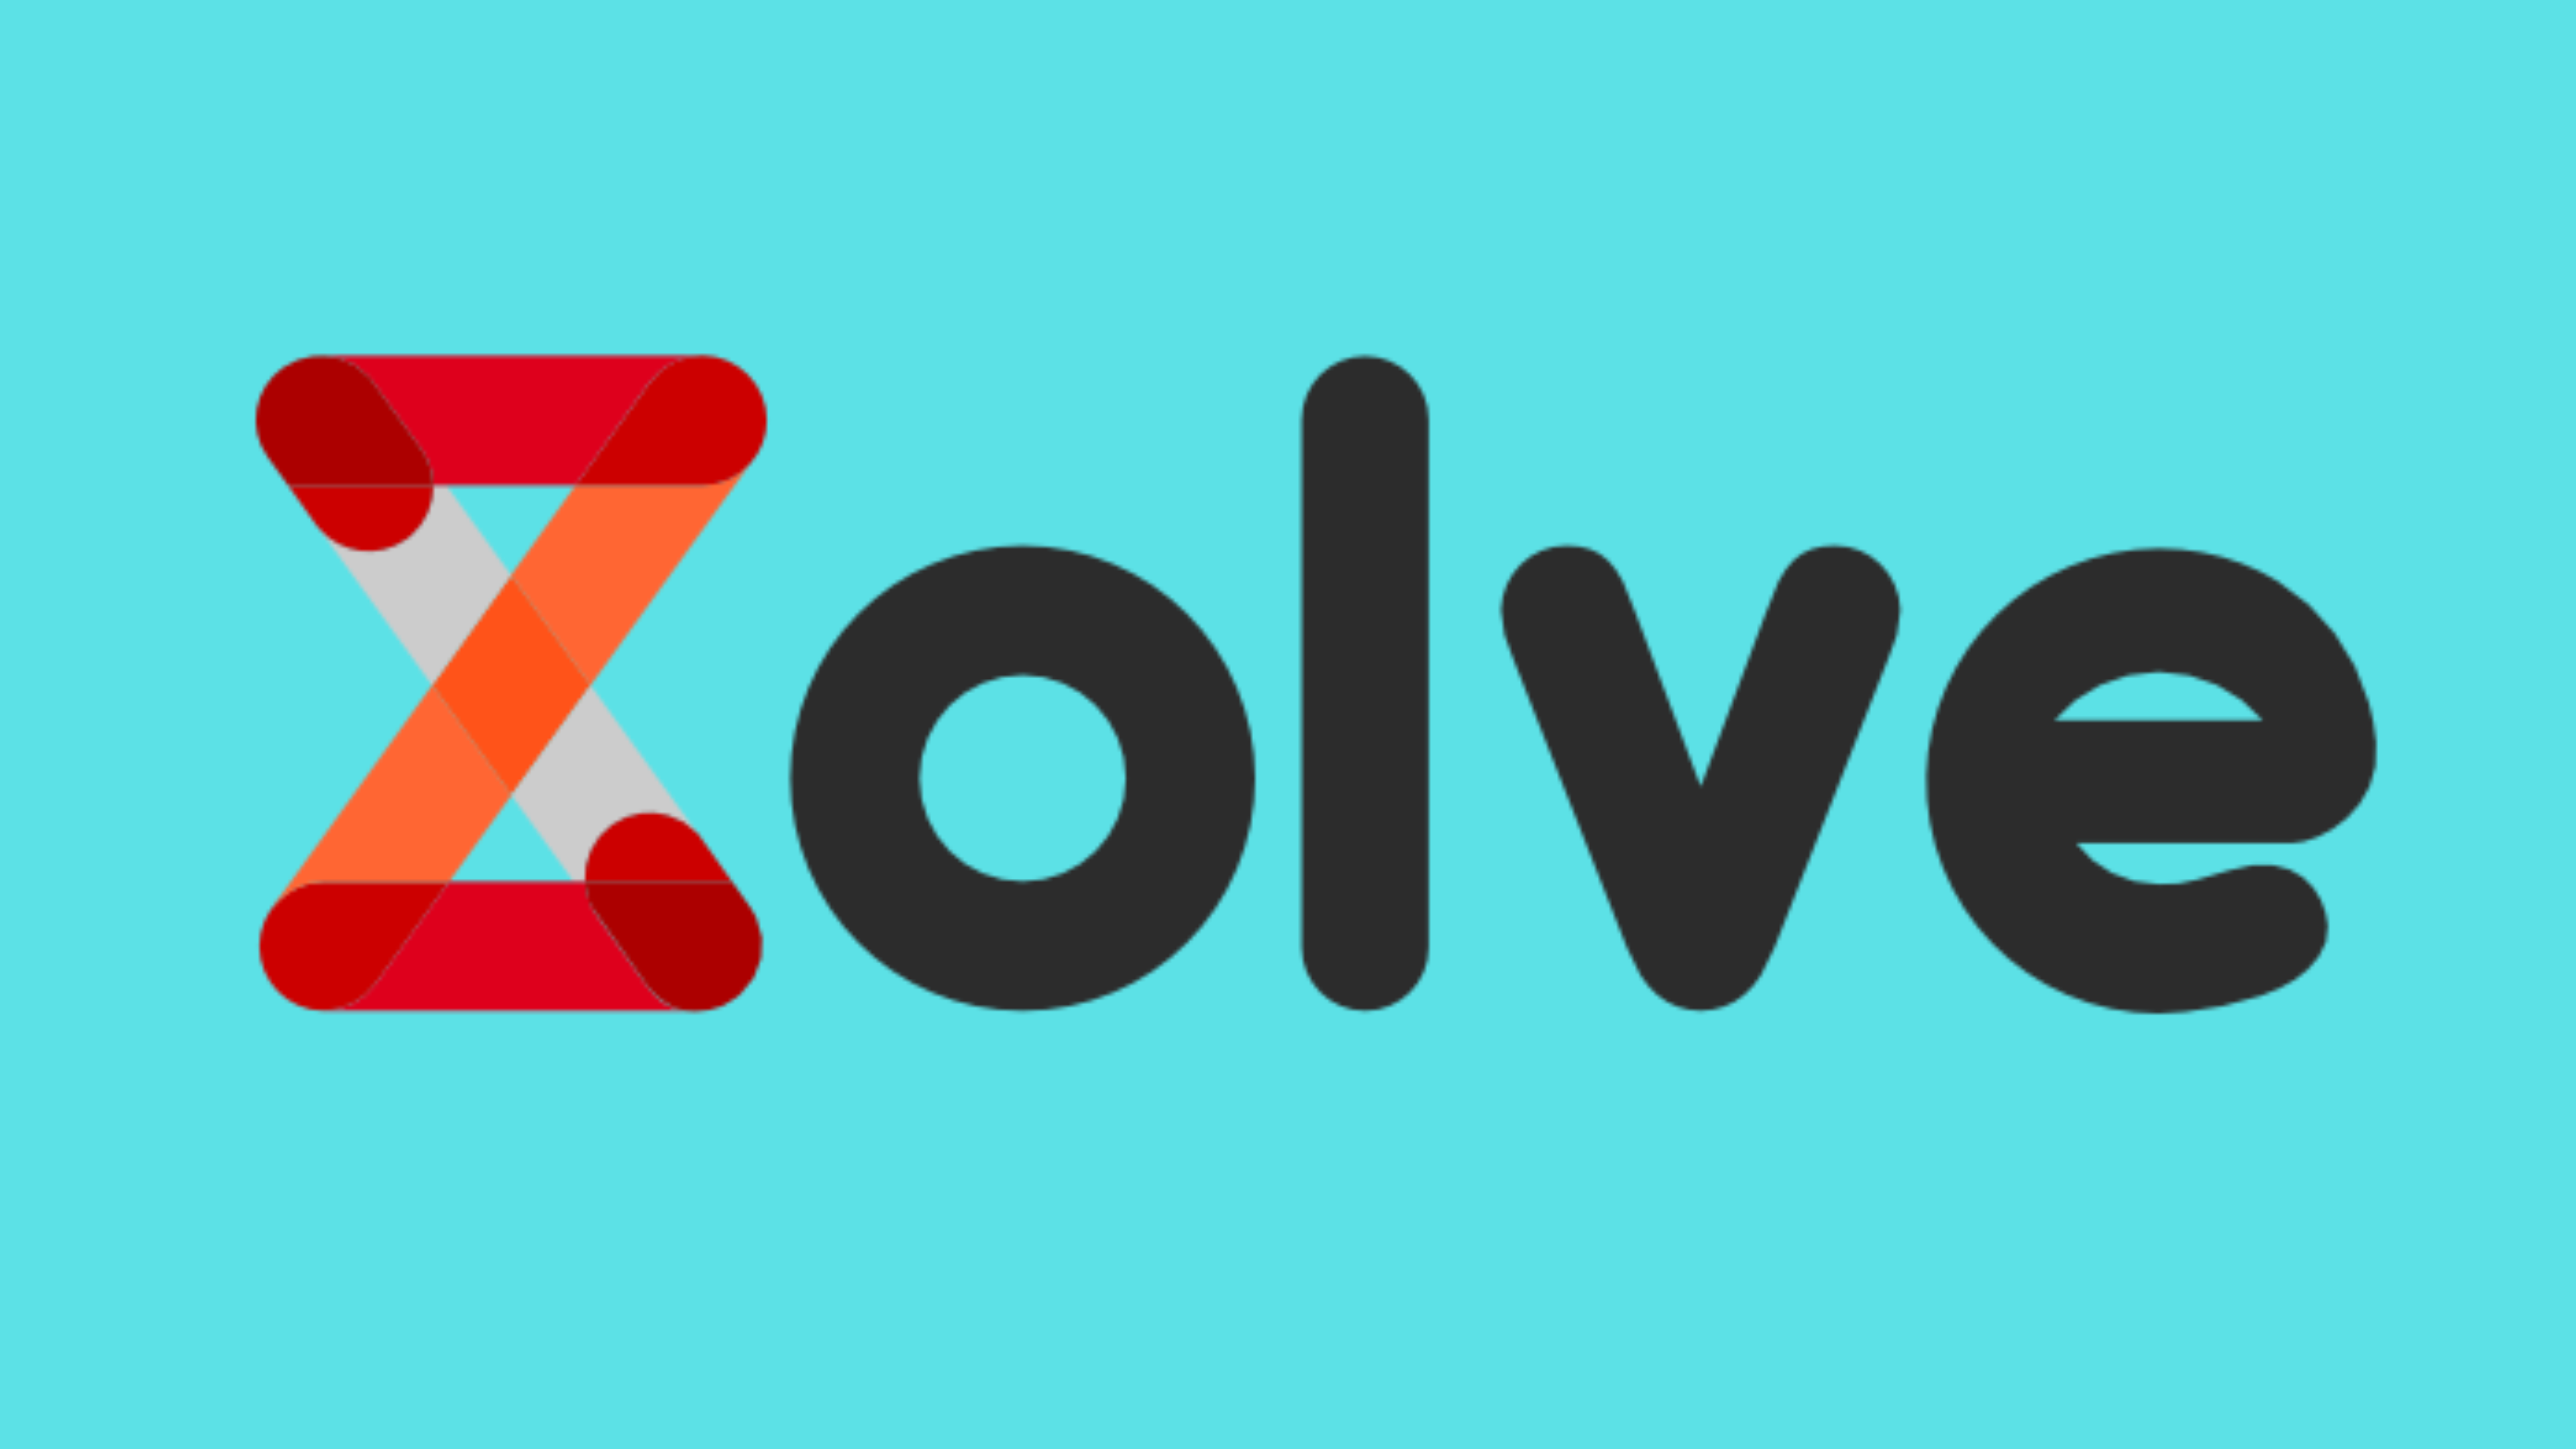 Zolve – 118% Rise in Traffic in 2 Months